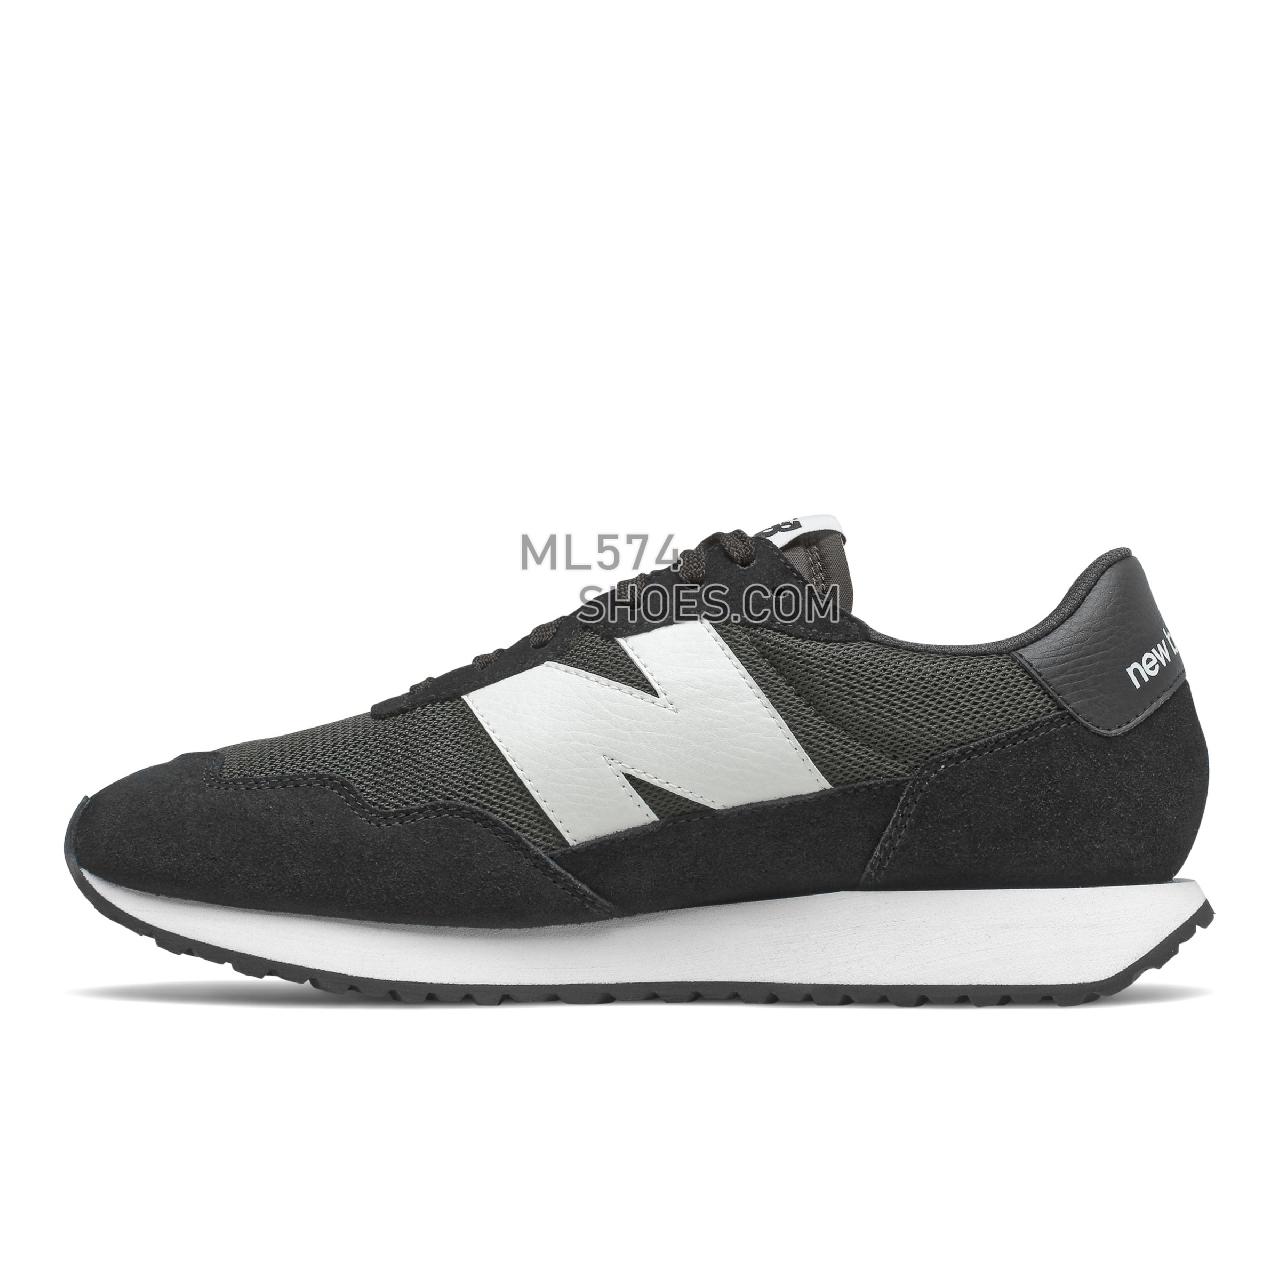 New Balance 237 - Men's Sport Style Sneakers - Black with Magnet - MS237CC